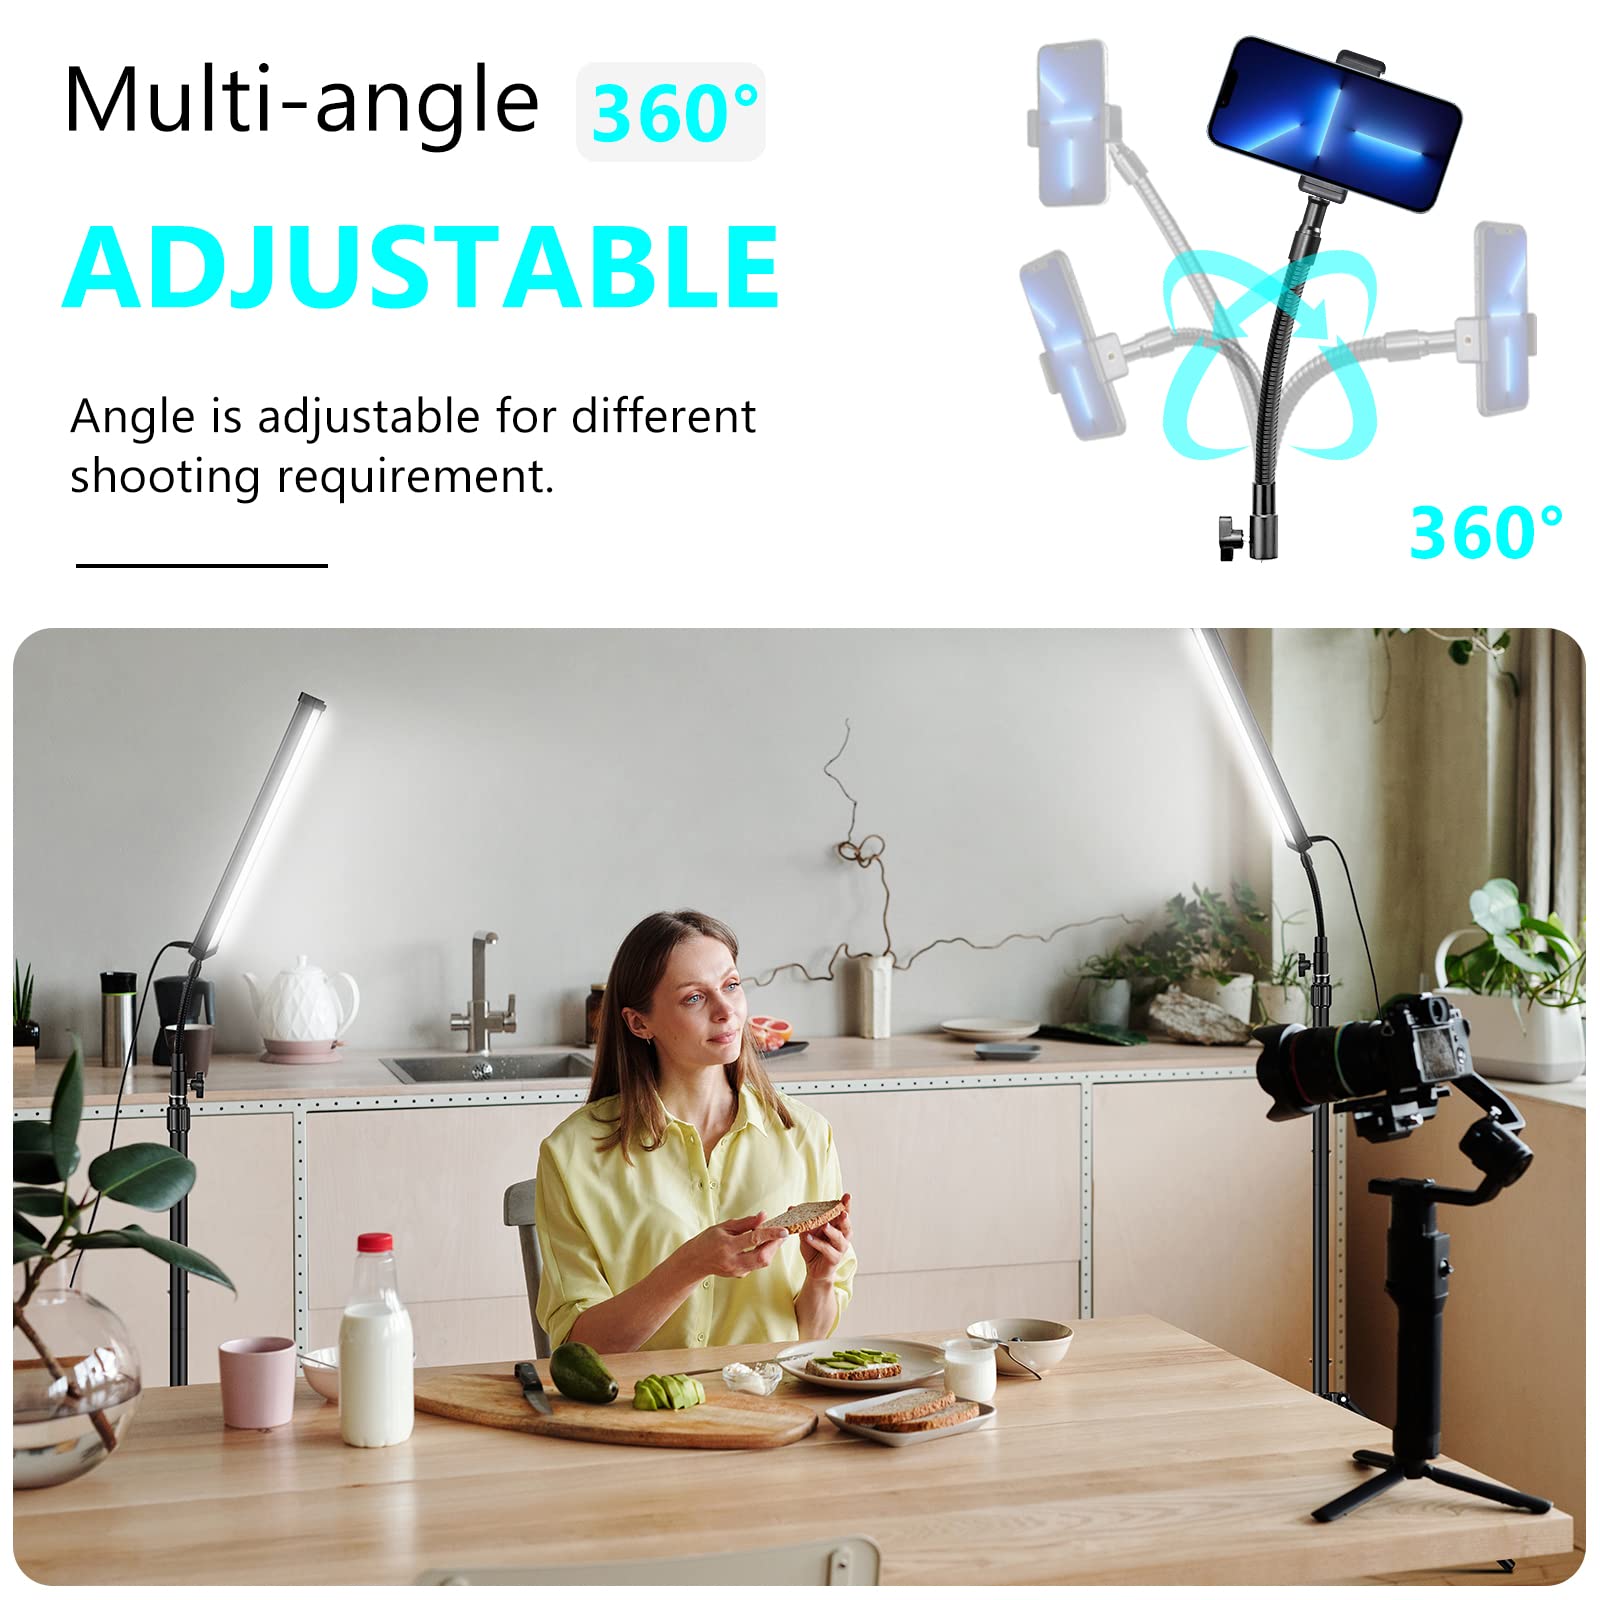 Led Video Lighting Kit with Wand Stick - Photography Studio Light,Adjustable Tripod Stand,Vallkay 9 Color Filters 5600K Dimmable Portable Stand for Live Streaming/Portrait Photo/Vlog, Black (D4002)